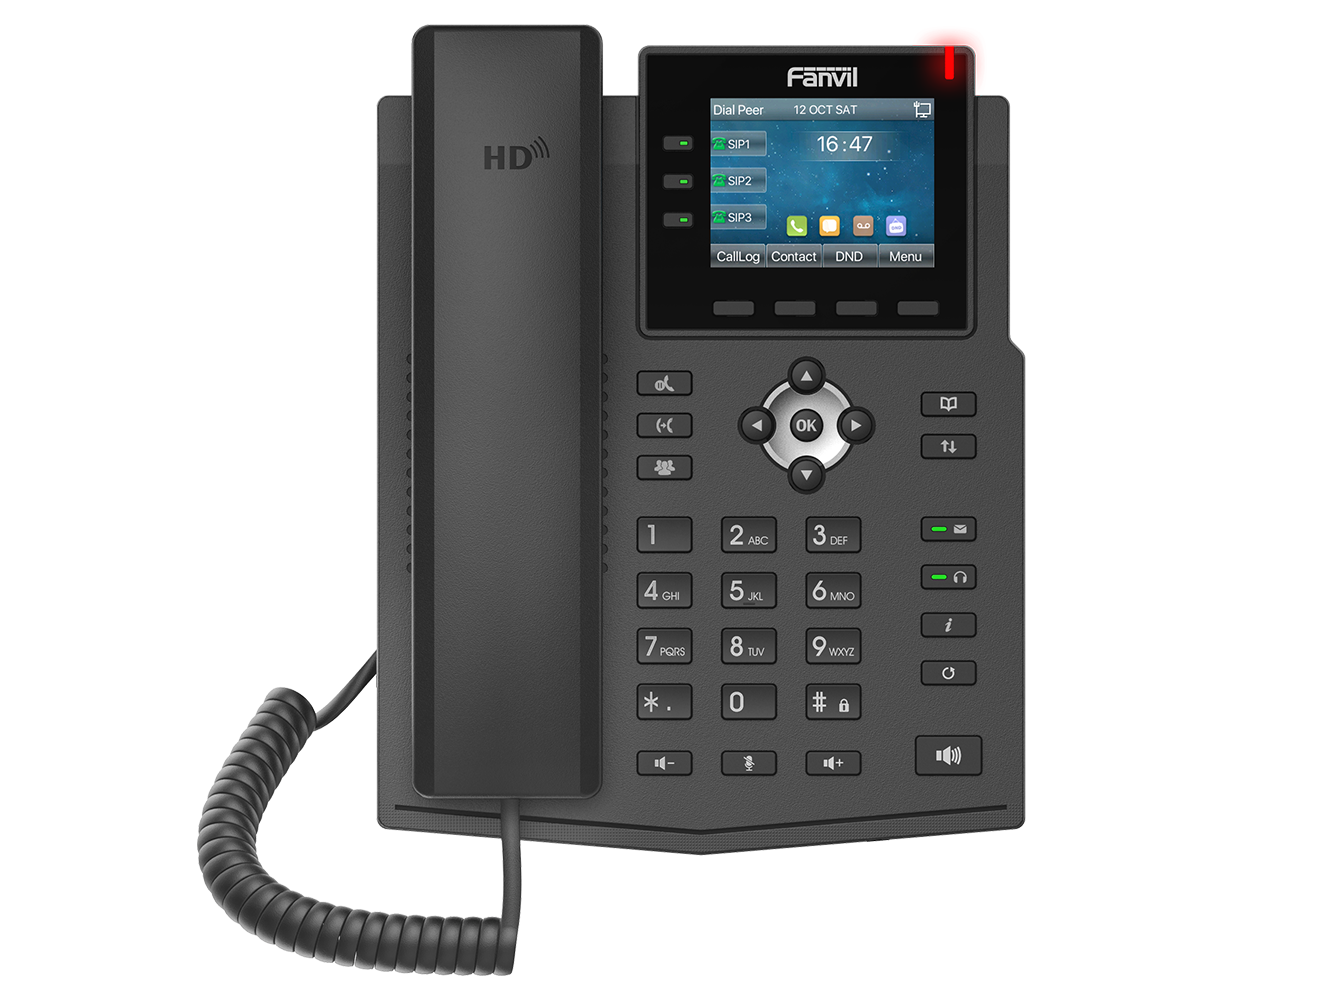 What type of IP Phone is the Fanvil X3U Pro?